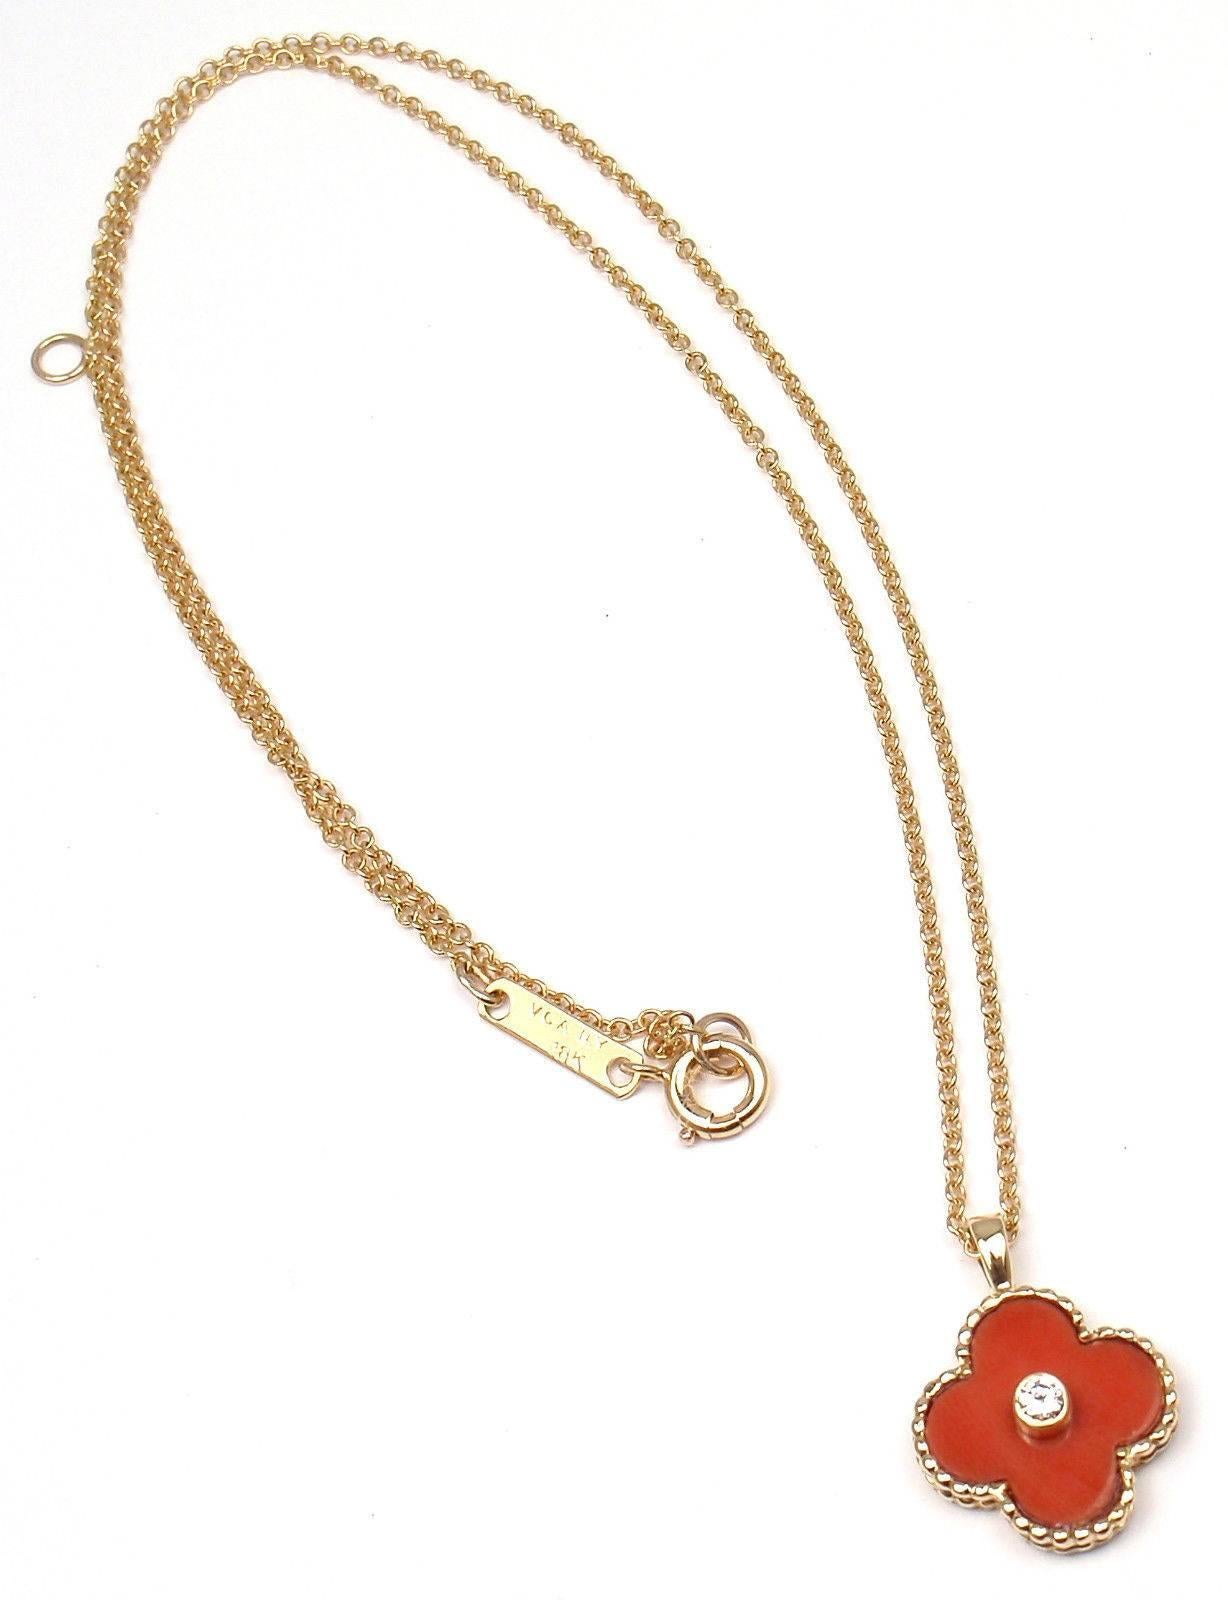 18k Yellow Gold Vintage Coral Alhambra Diamond Necklace.
With 1 Round brilliant cut diamond .06ct F/VS1
Alhambra cut coral 
Details: 
Measurements: 16'' necklace, 1mm, 
Pendant is 15mm x 15mm 
Weight: 5 grams 
Stamped Hallmarks: VCA 18k NY